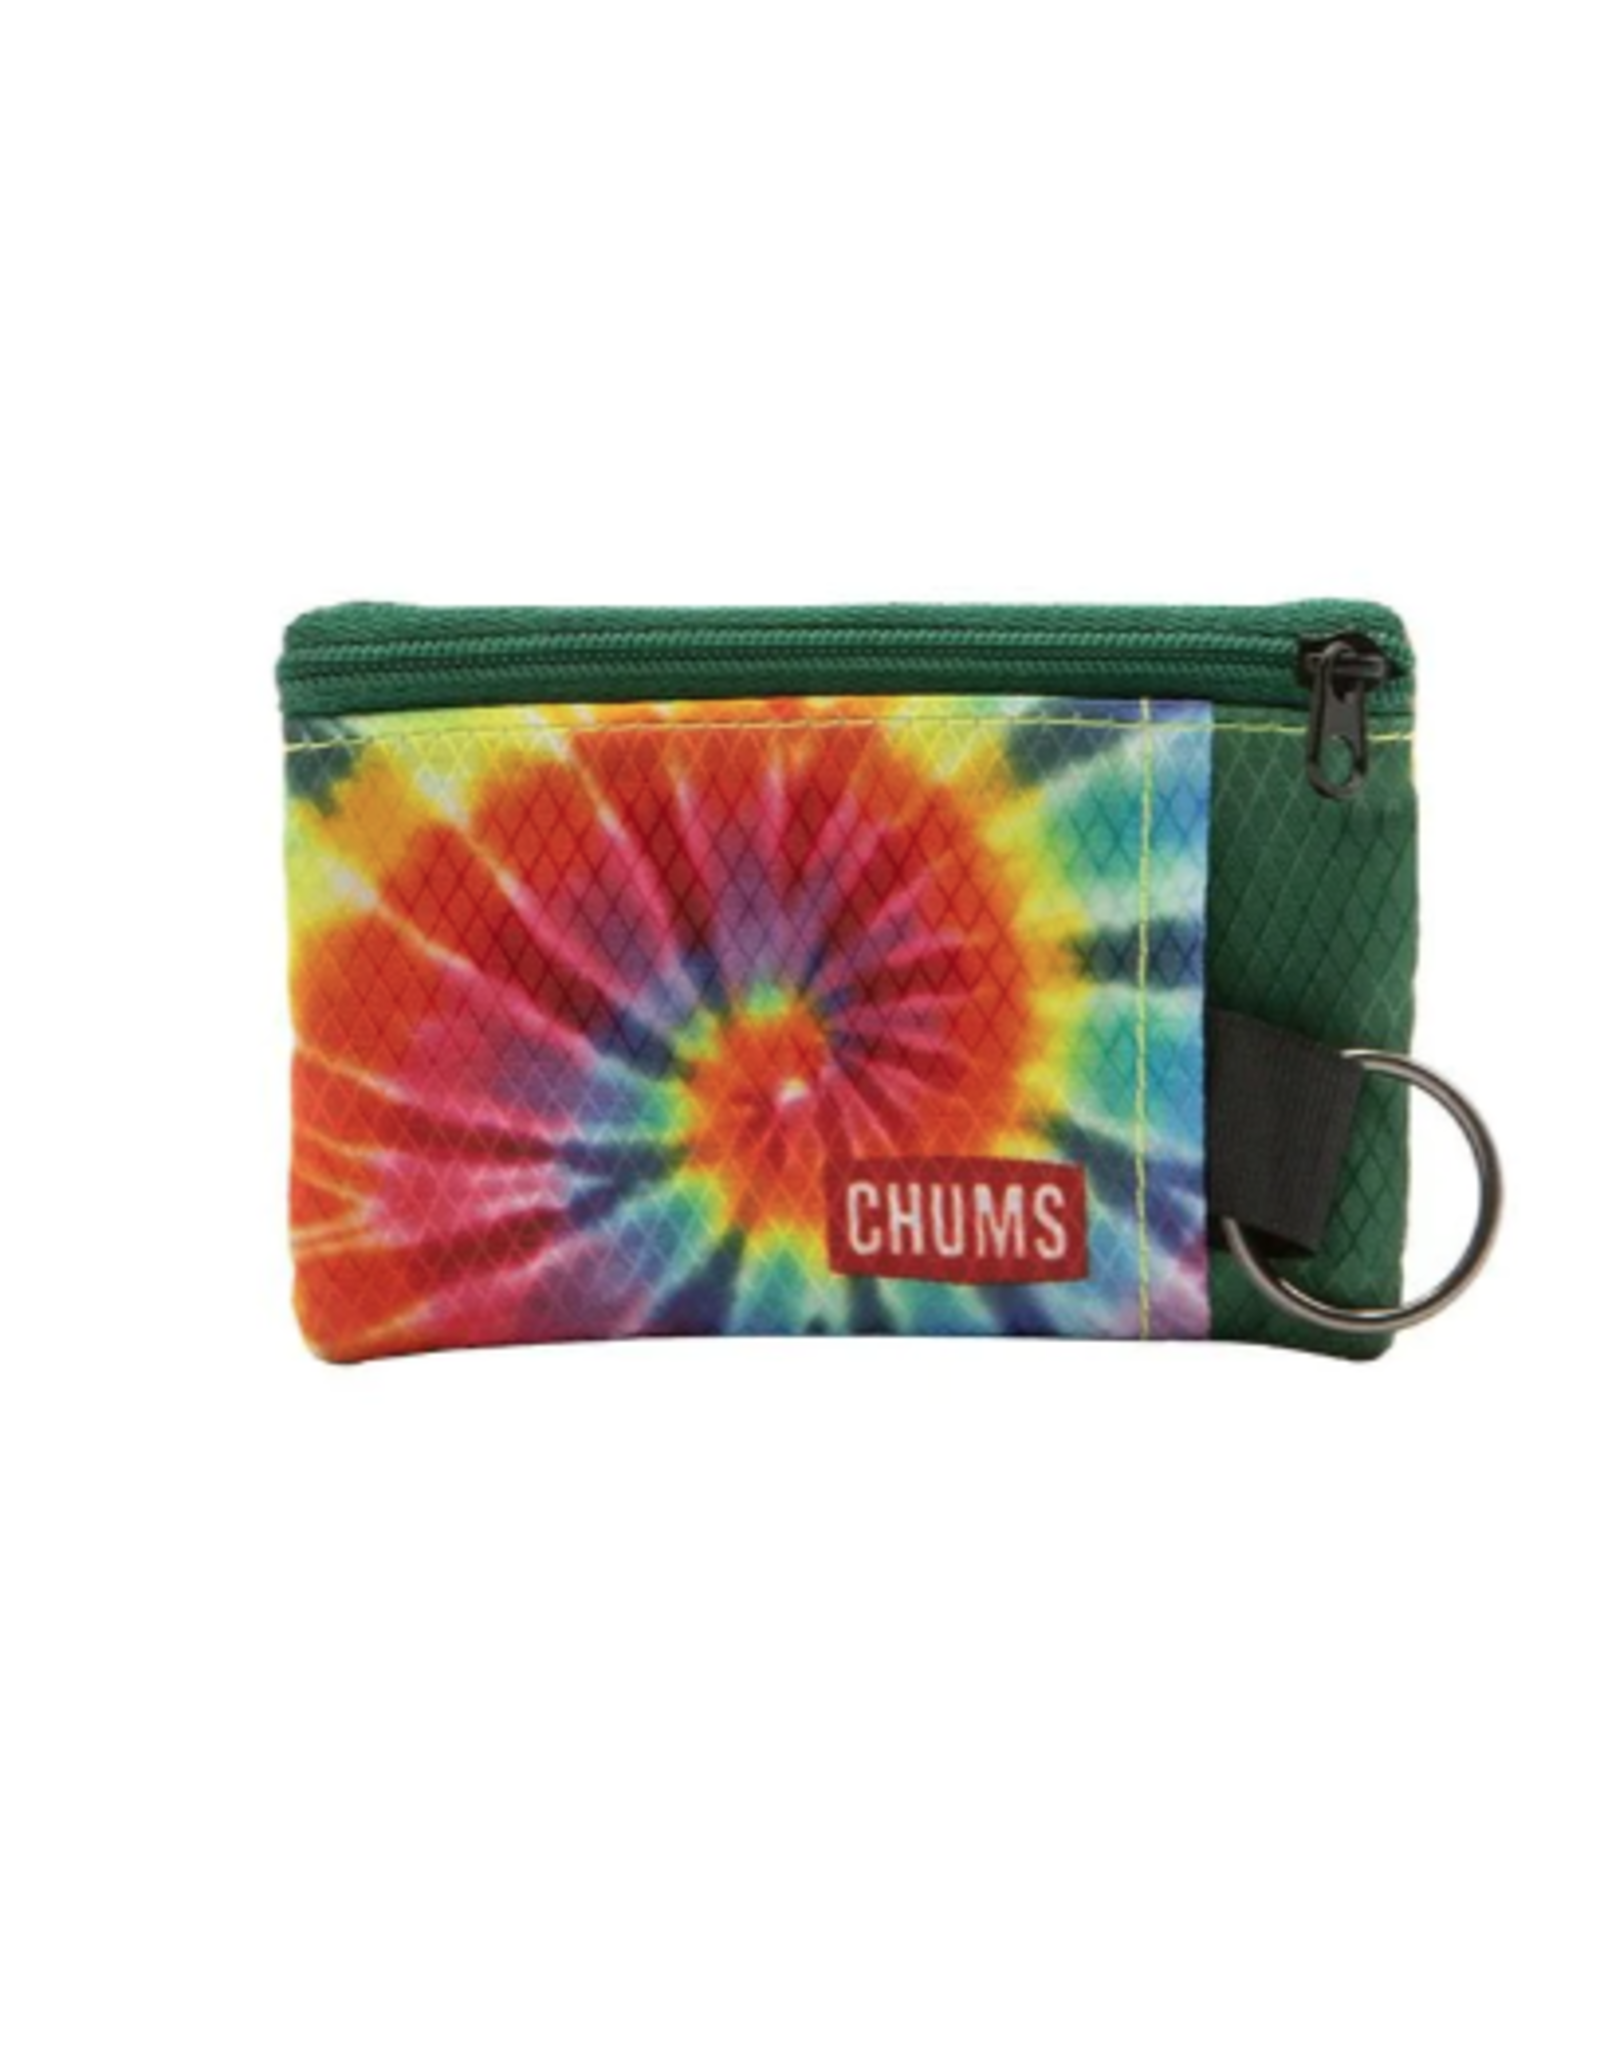 Chums SURFSHORTS WALLET PATTERNS